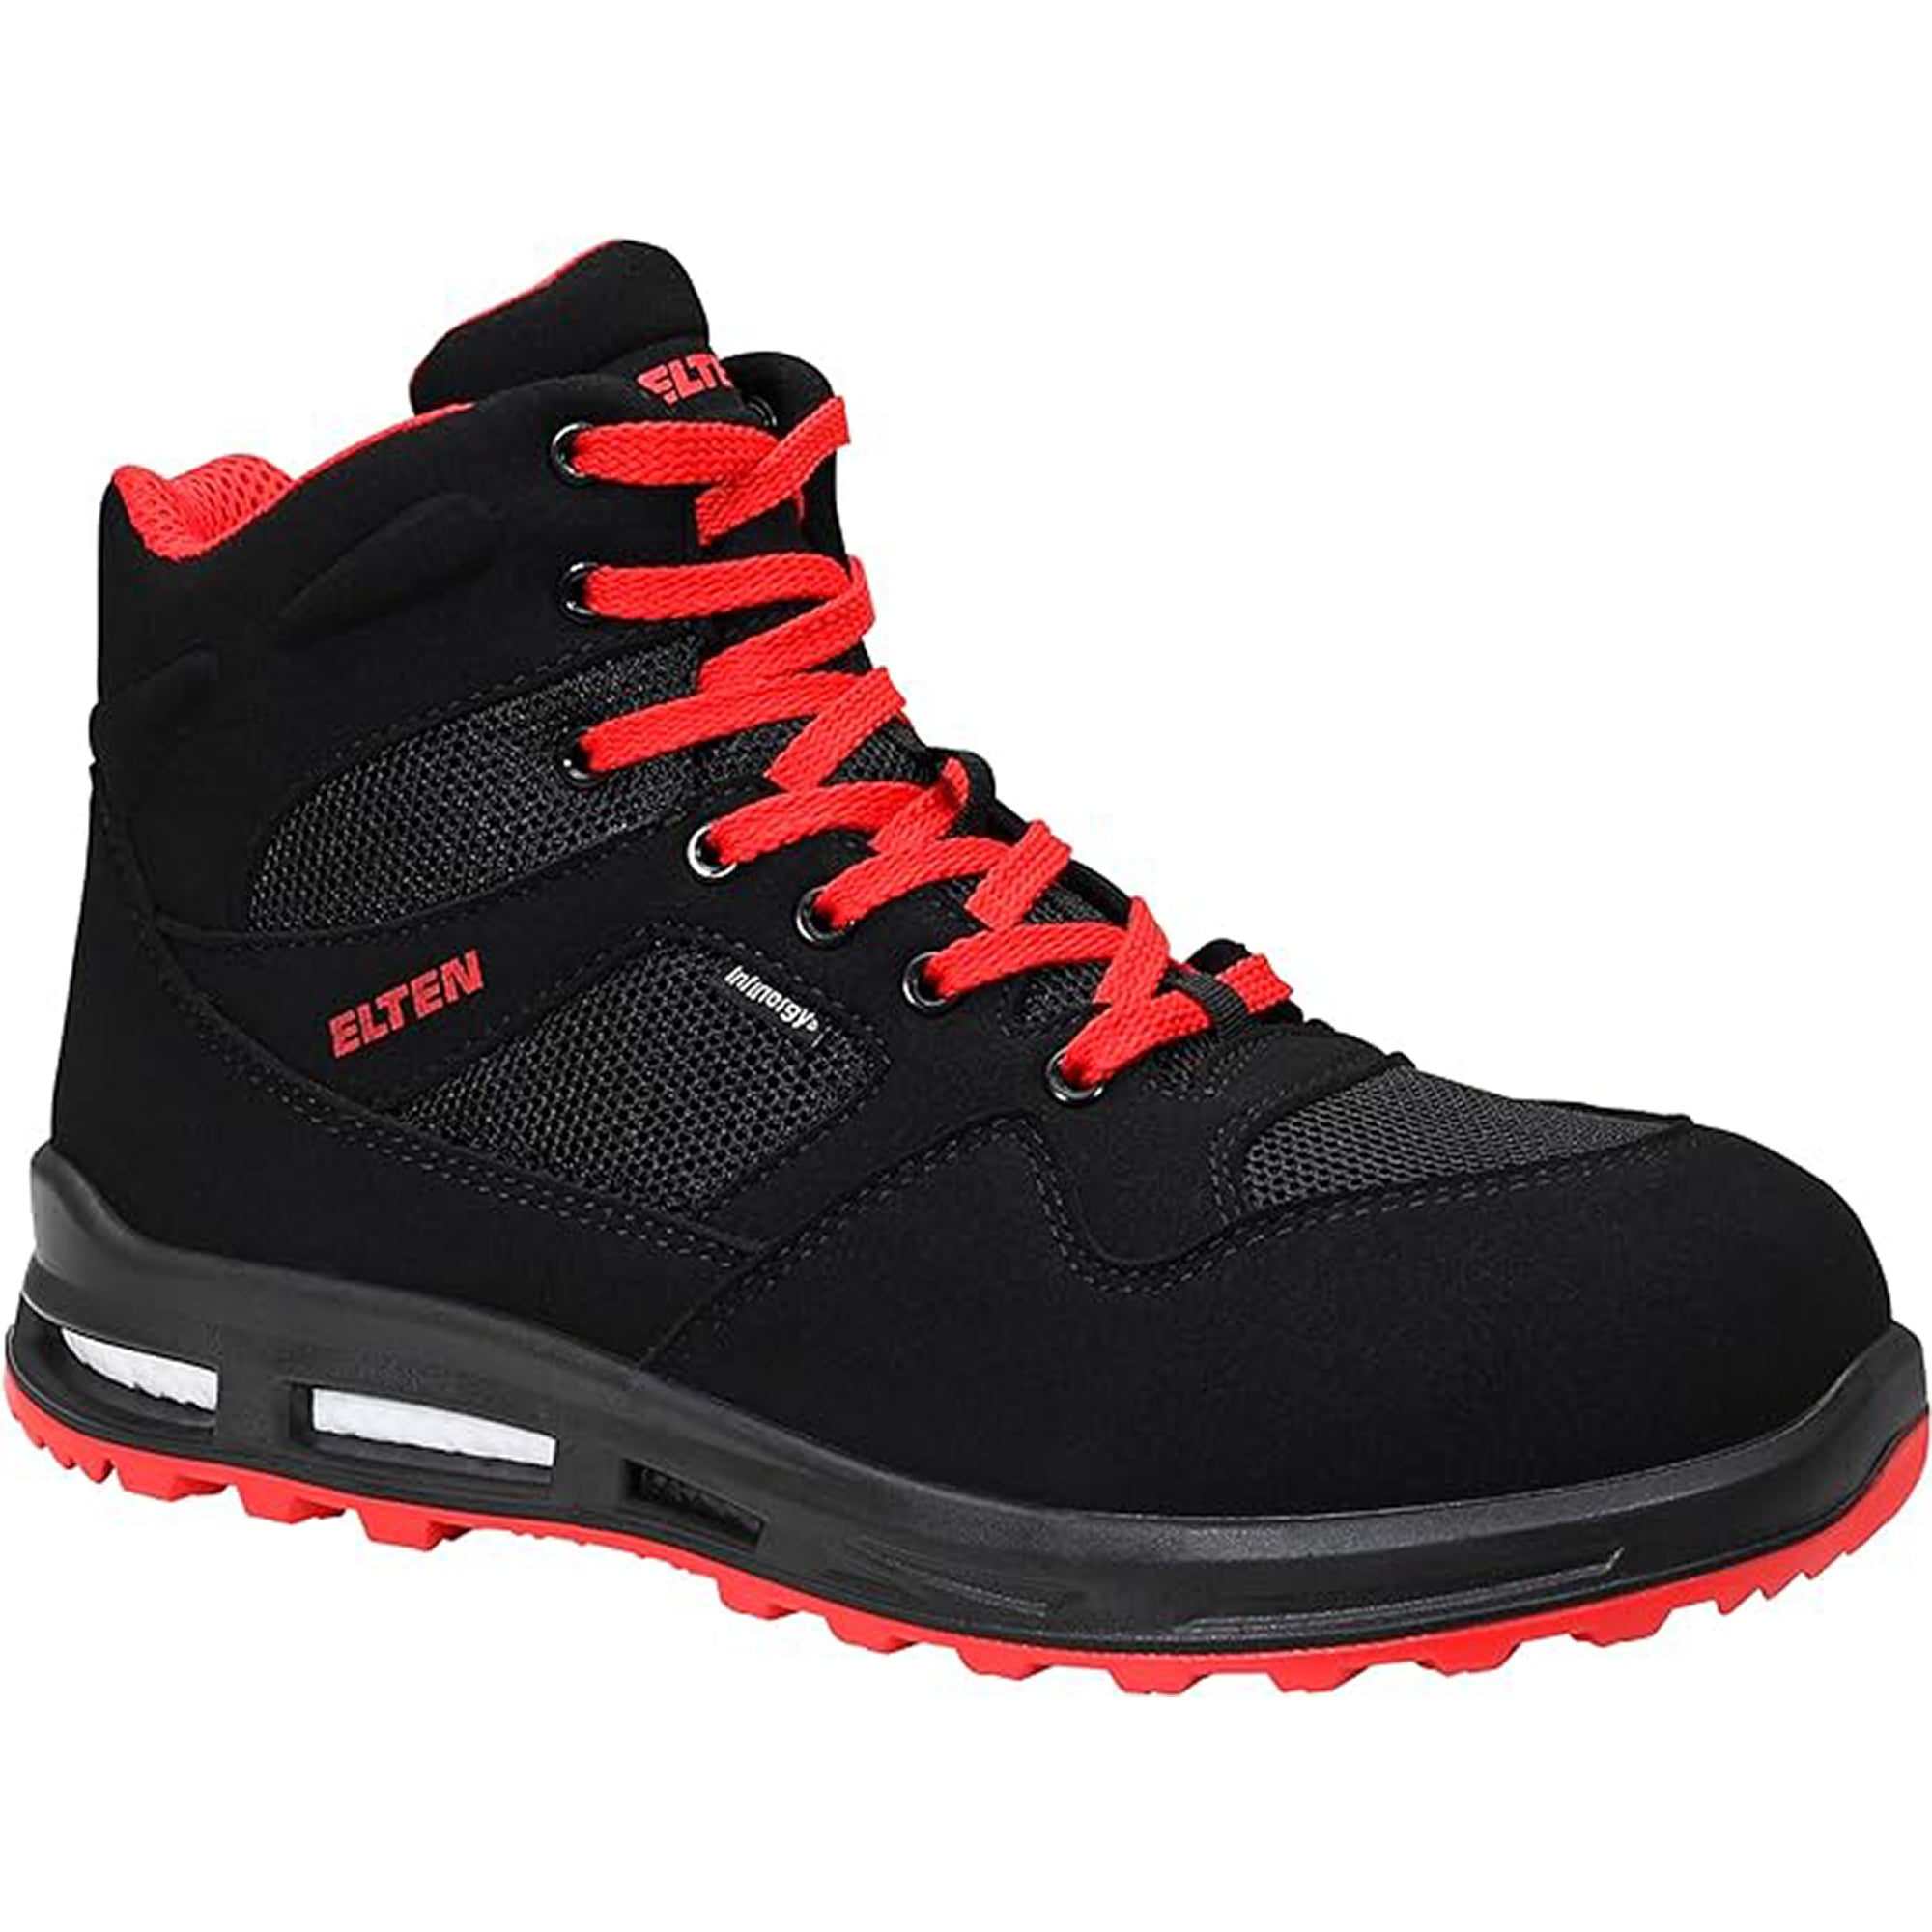 ELTEN  LAKERS XXT Mid ESD S1P  Safety work boots shoes Black Red